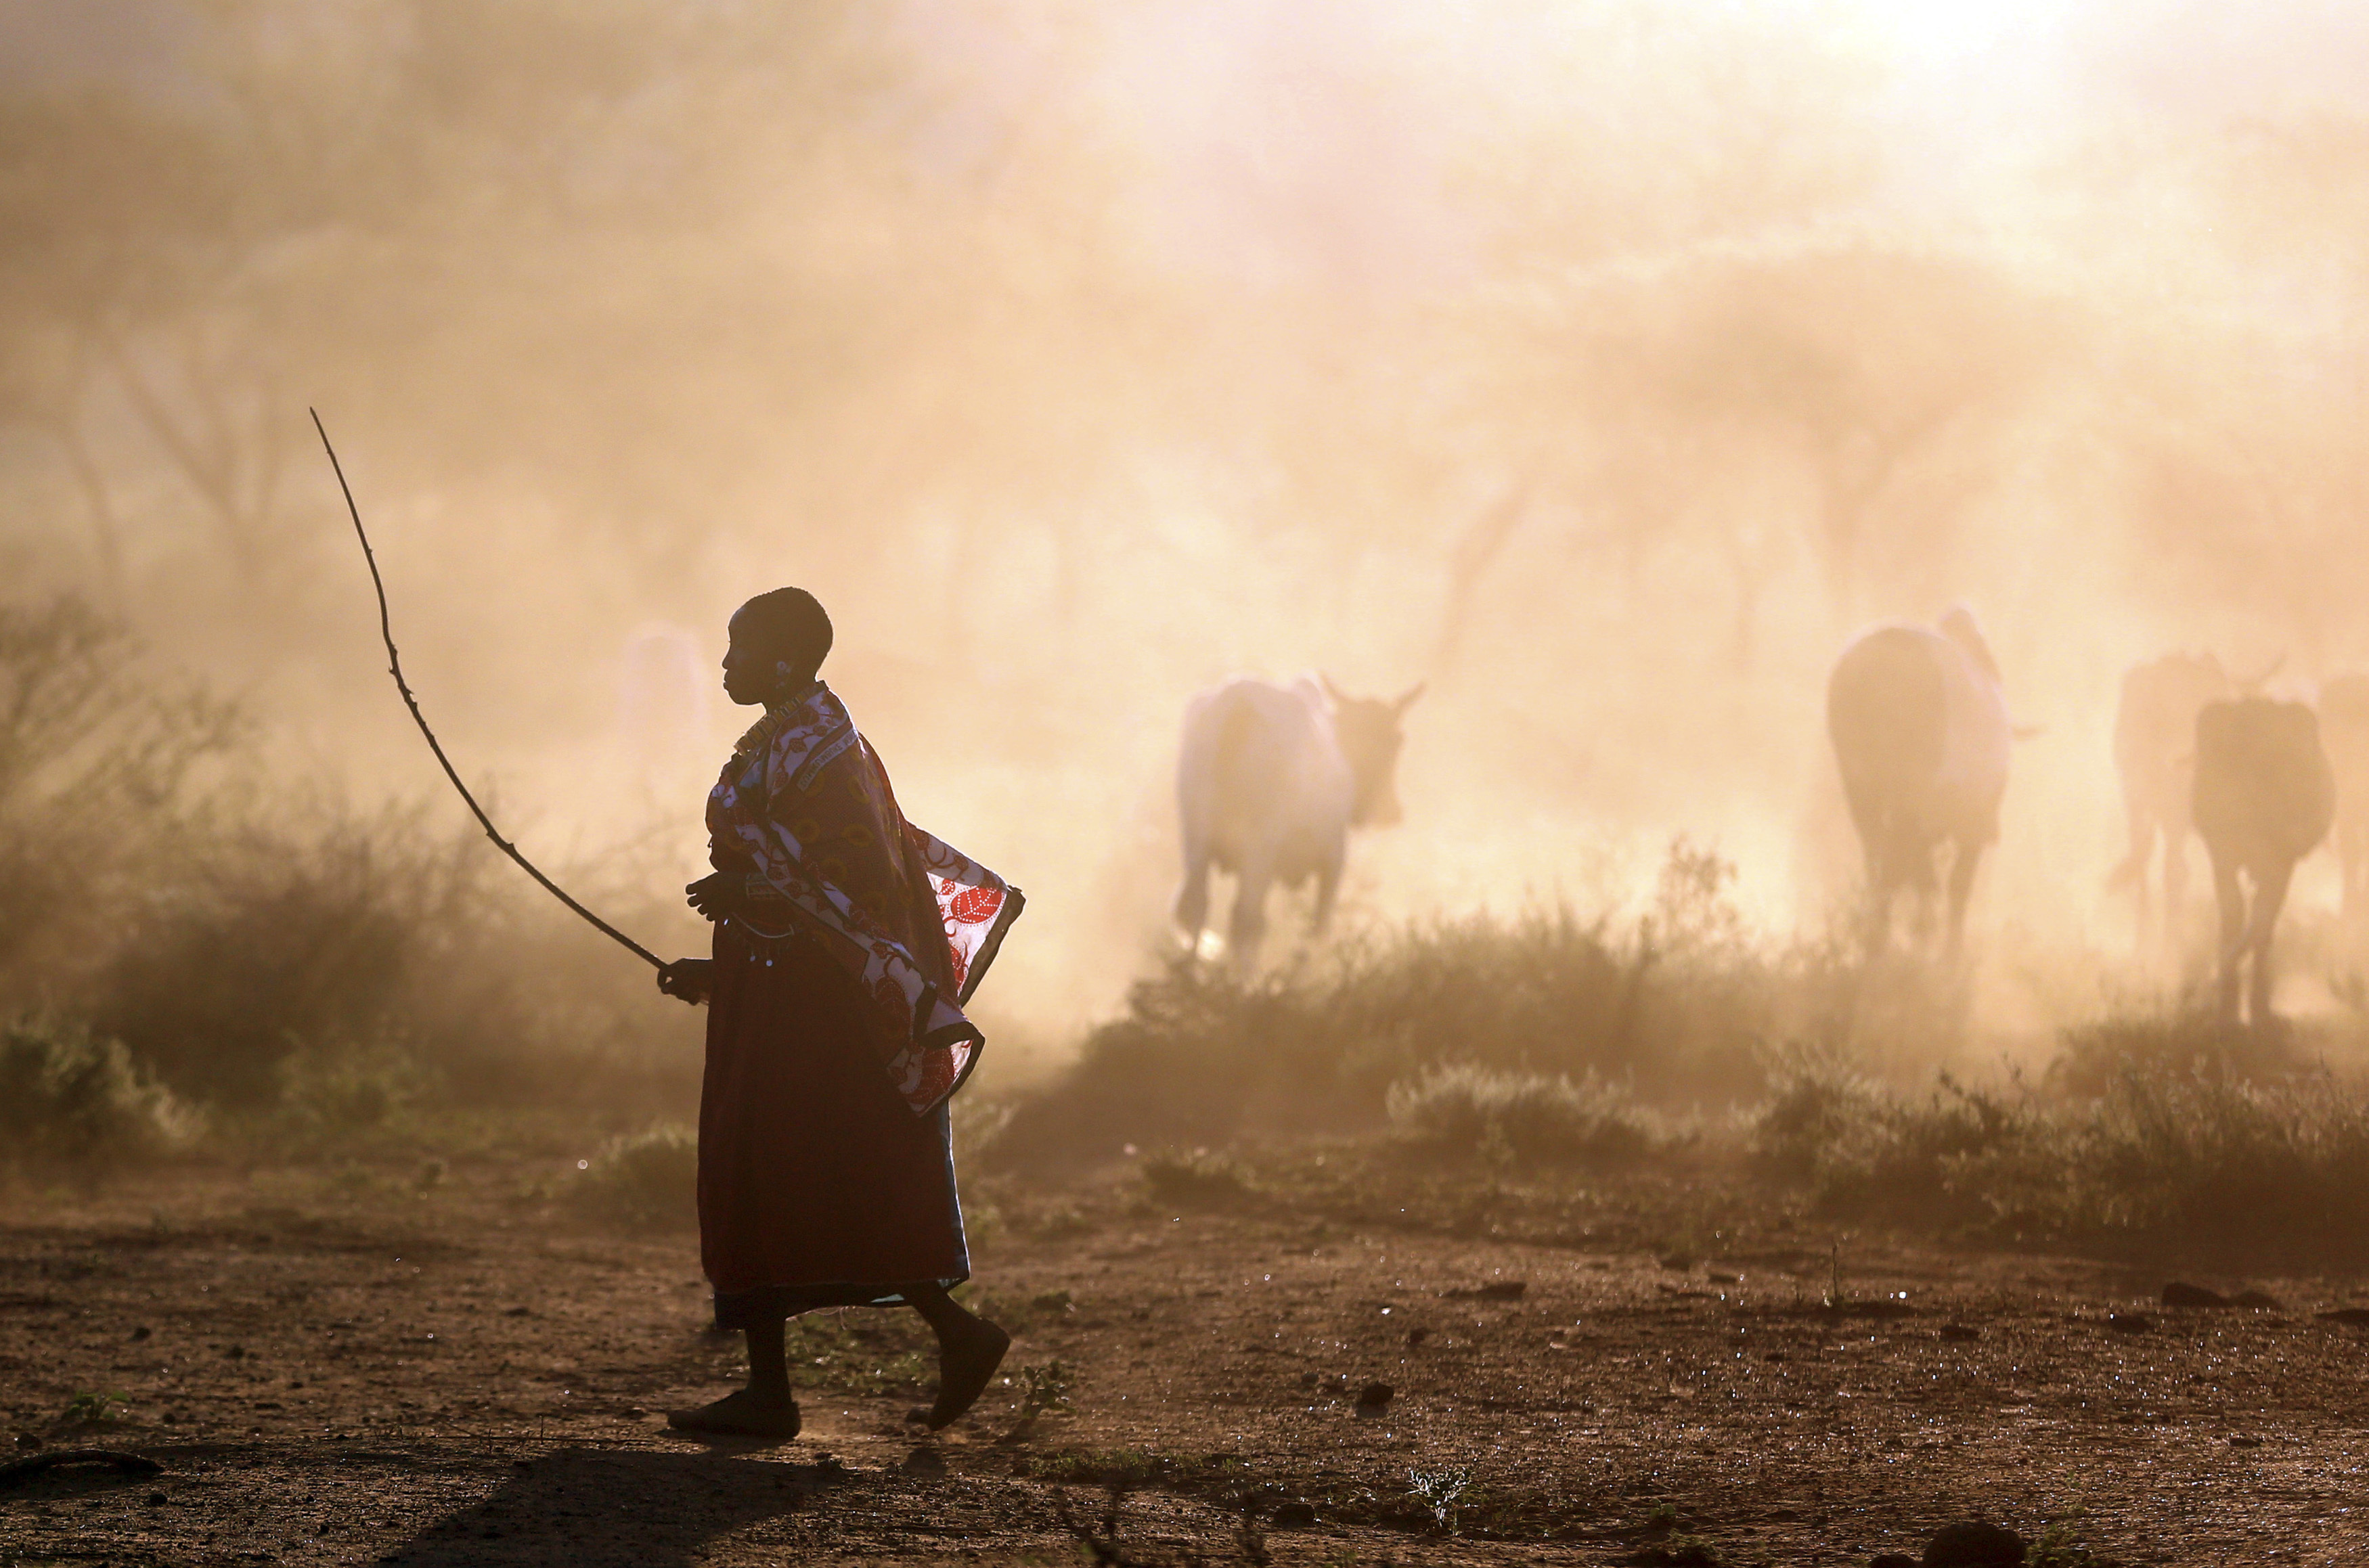 A Masai herder walks with grazing cattle during a celebration of an initiation ceremony in the remote village of Eremit, some 80 km (50 miles) southwest of Nairobi